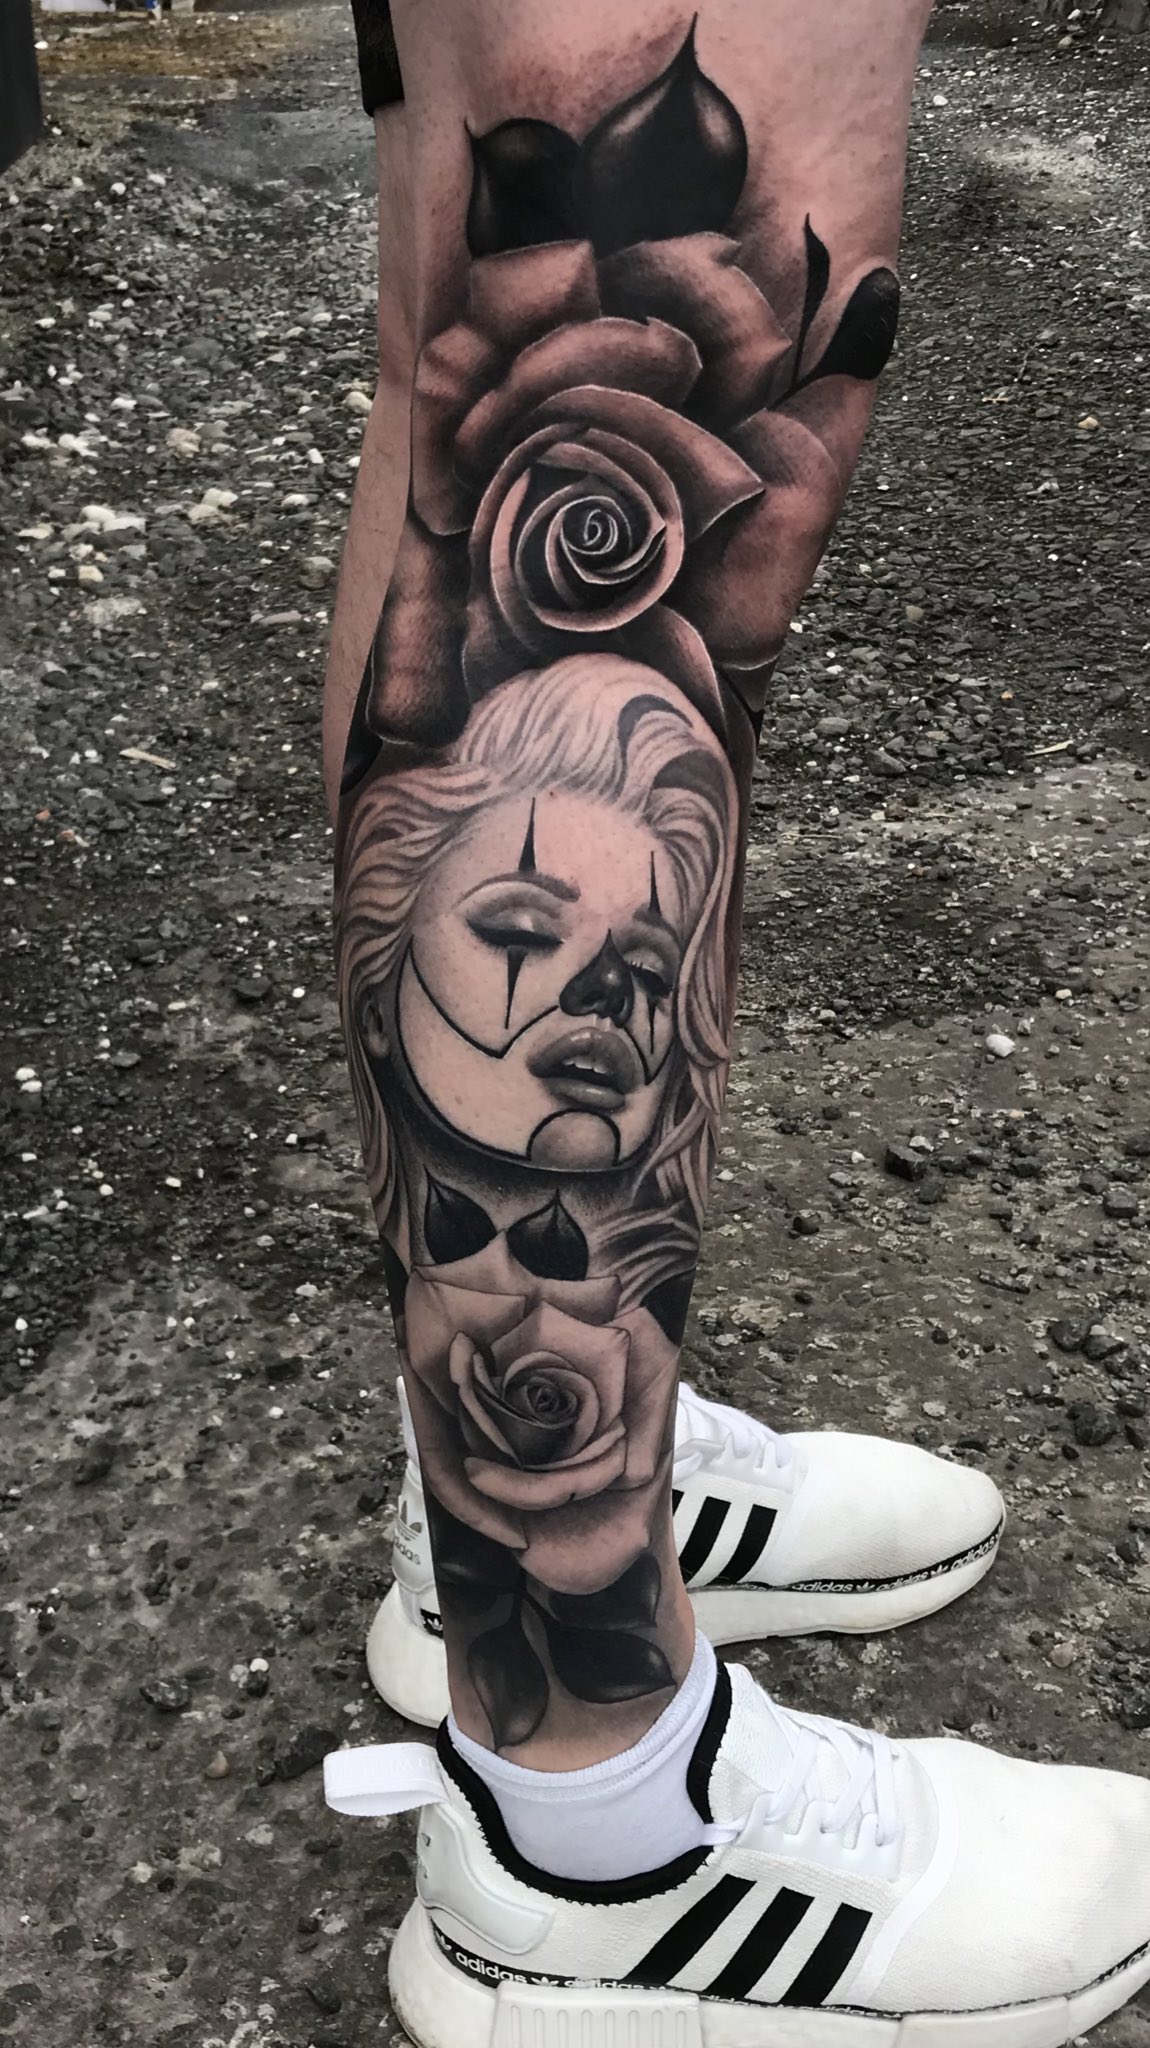 Carloz Tattoos (Carl Heggarty) on X: "Got back onto this beast of a Chicano themed leg sleeve today. Top rose fresh today and Chicano chick and bottom rose fully healed. Like, Retweet,